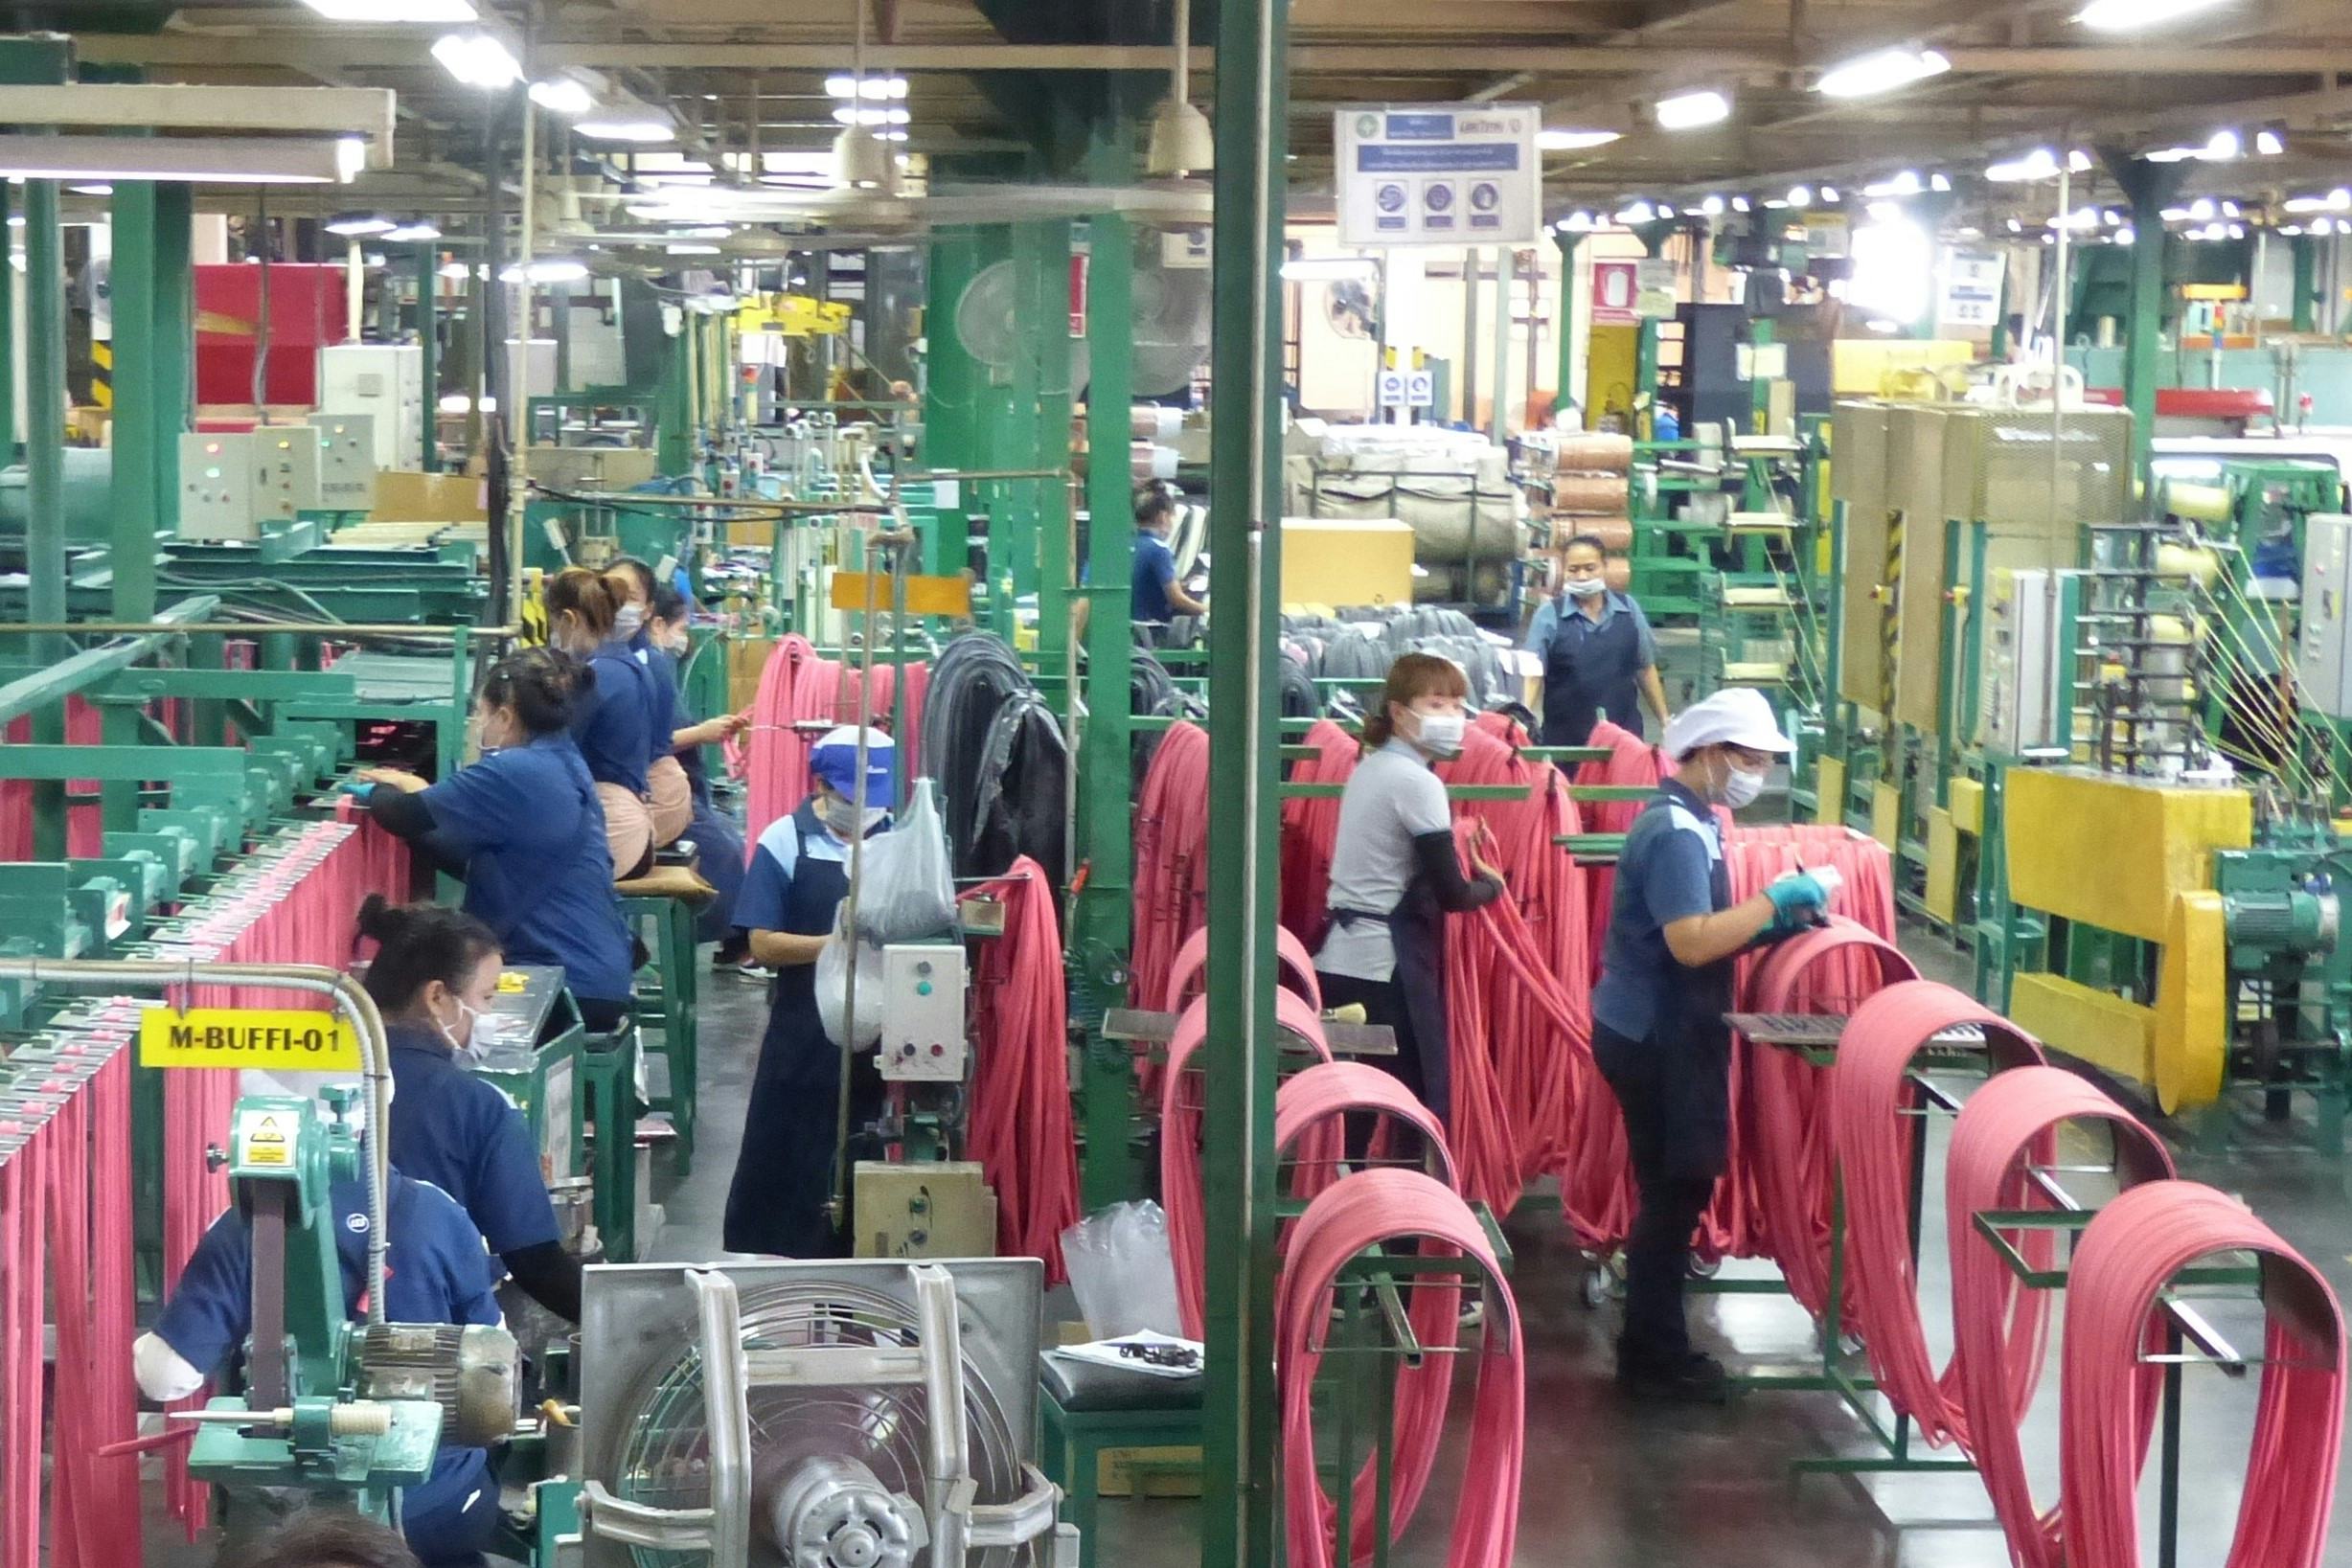 Lion Tyres Thailand (LTT) will expand its factory in Bangpoo industrial district, Bangkok, premises from 36,000 to 52,000 square meters. – Photo Bike Europe